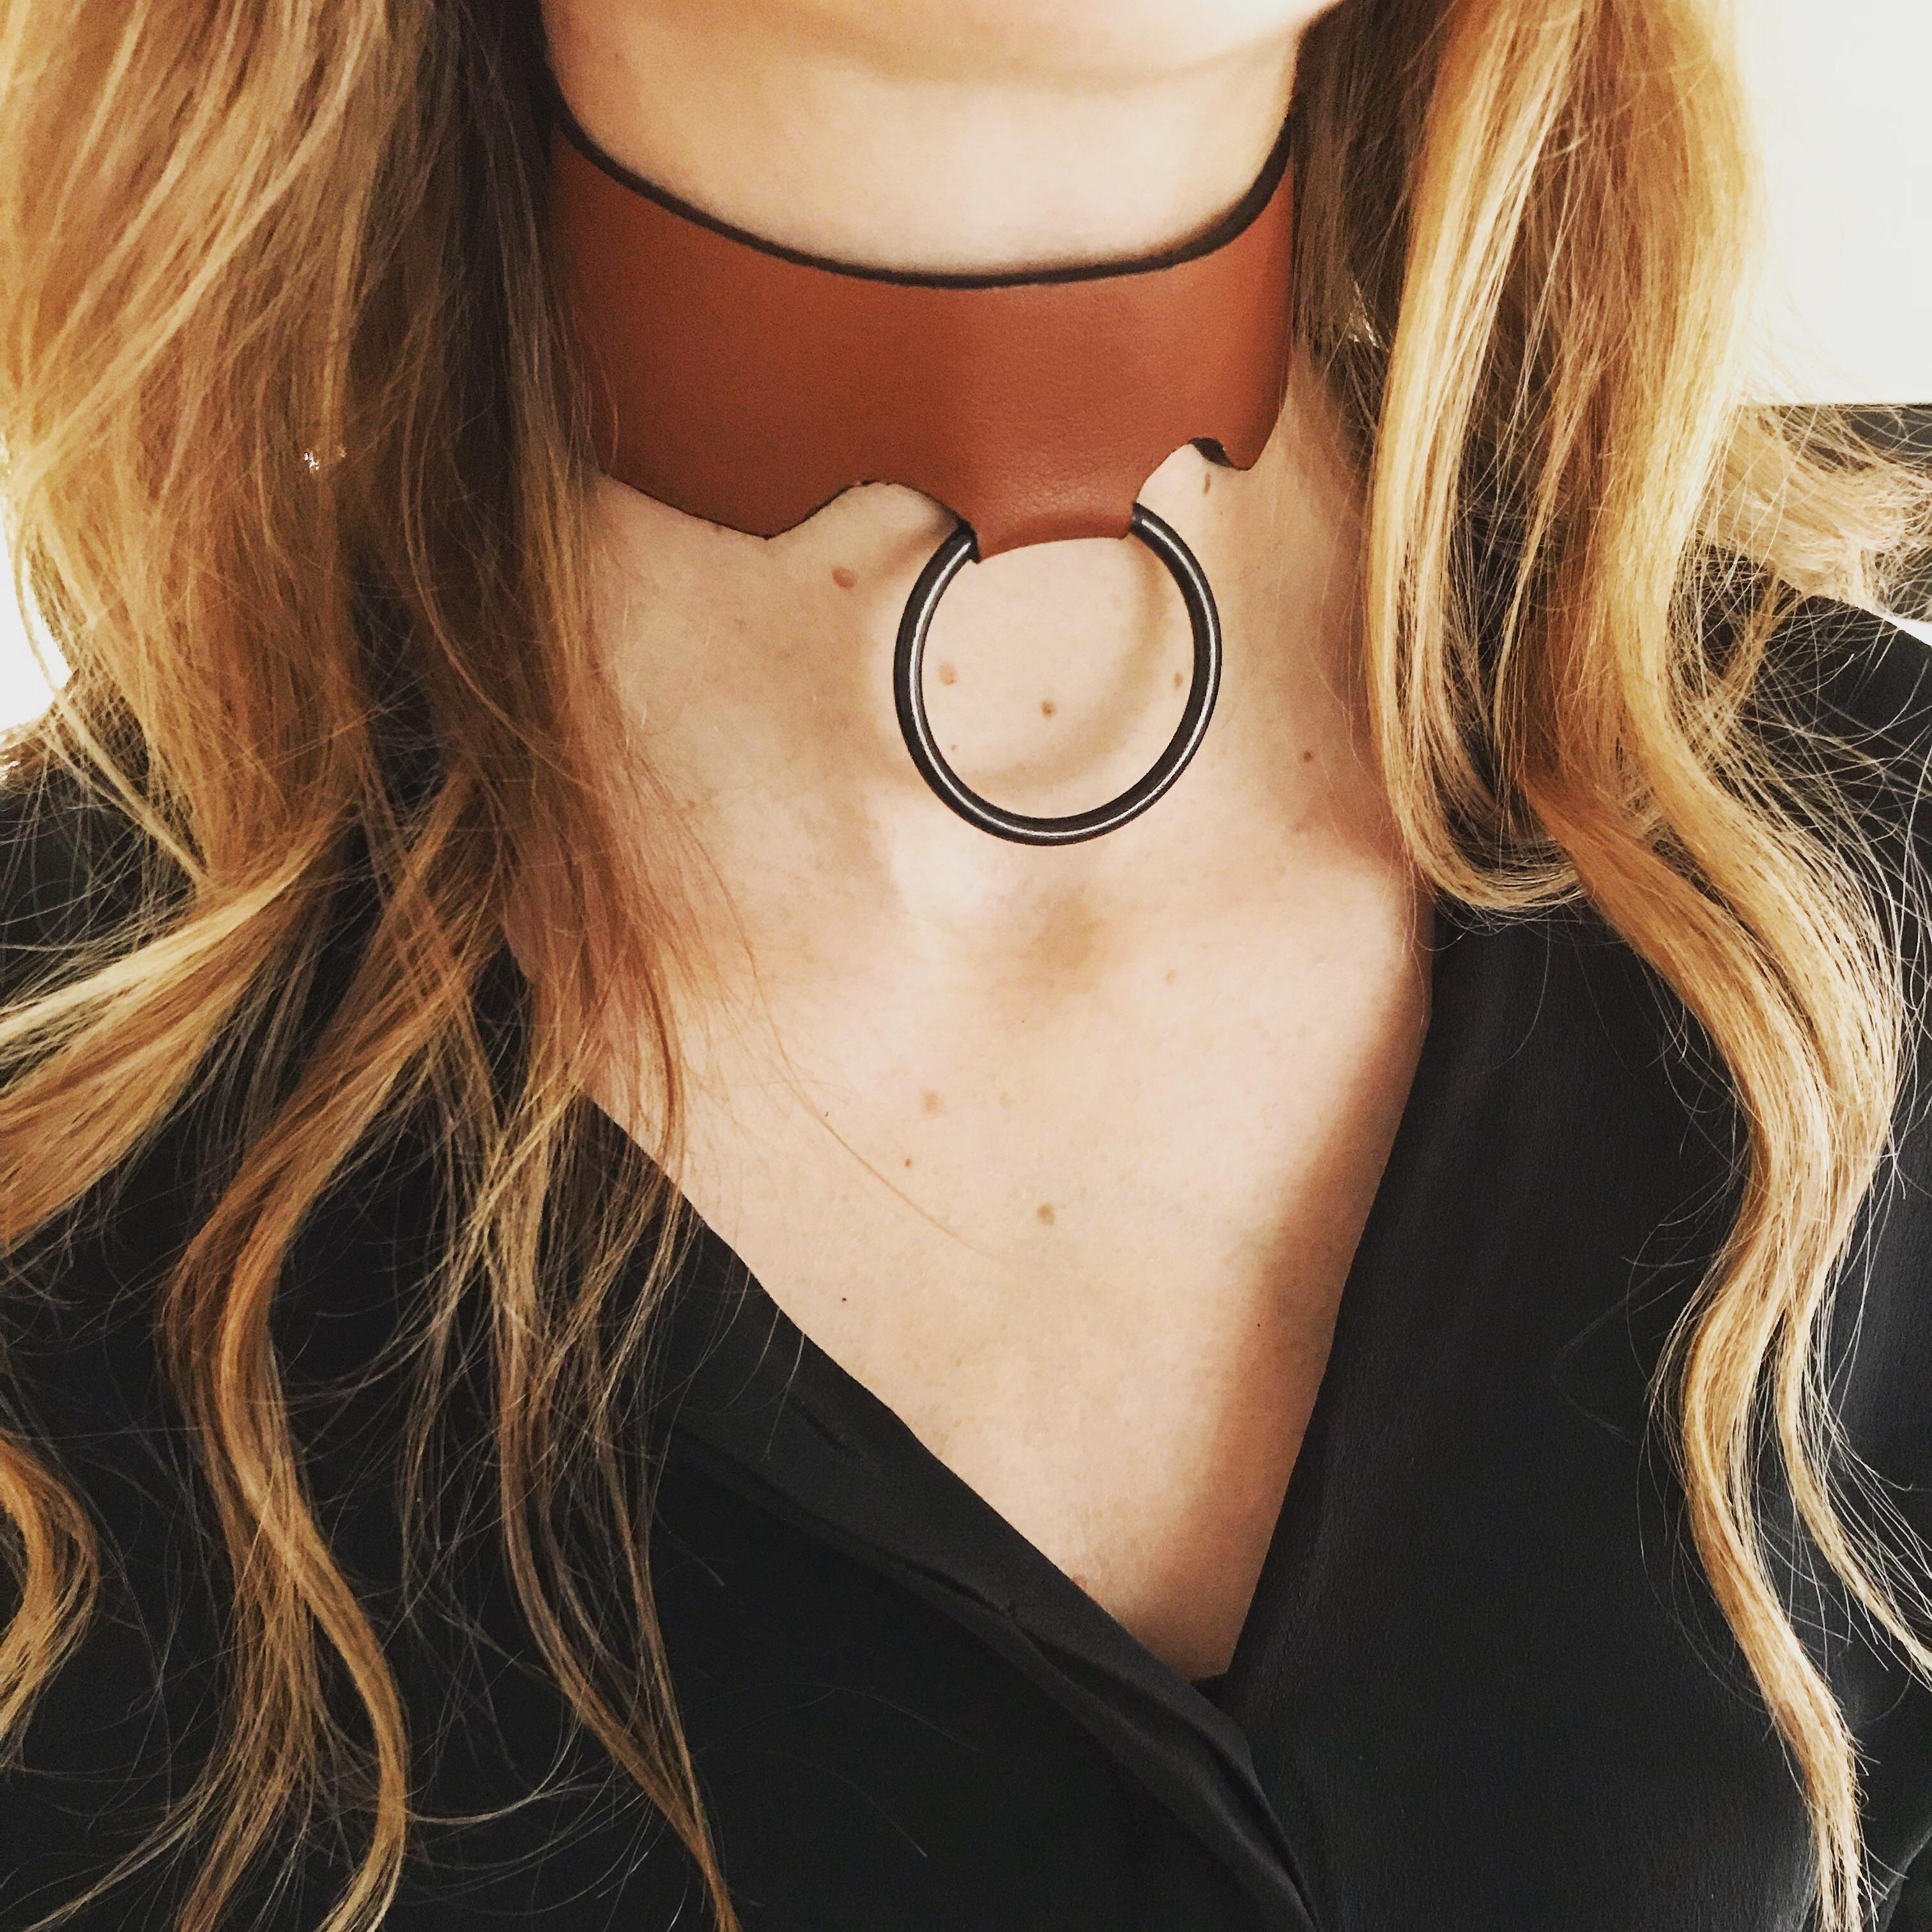 Homemade collar :-) you asked for picture on skin..